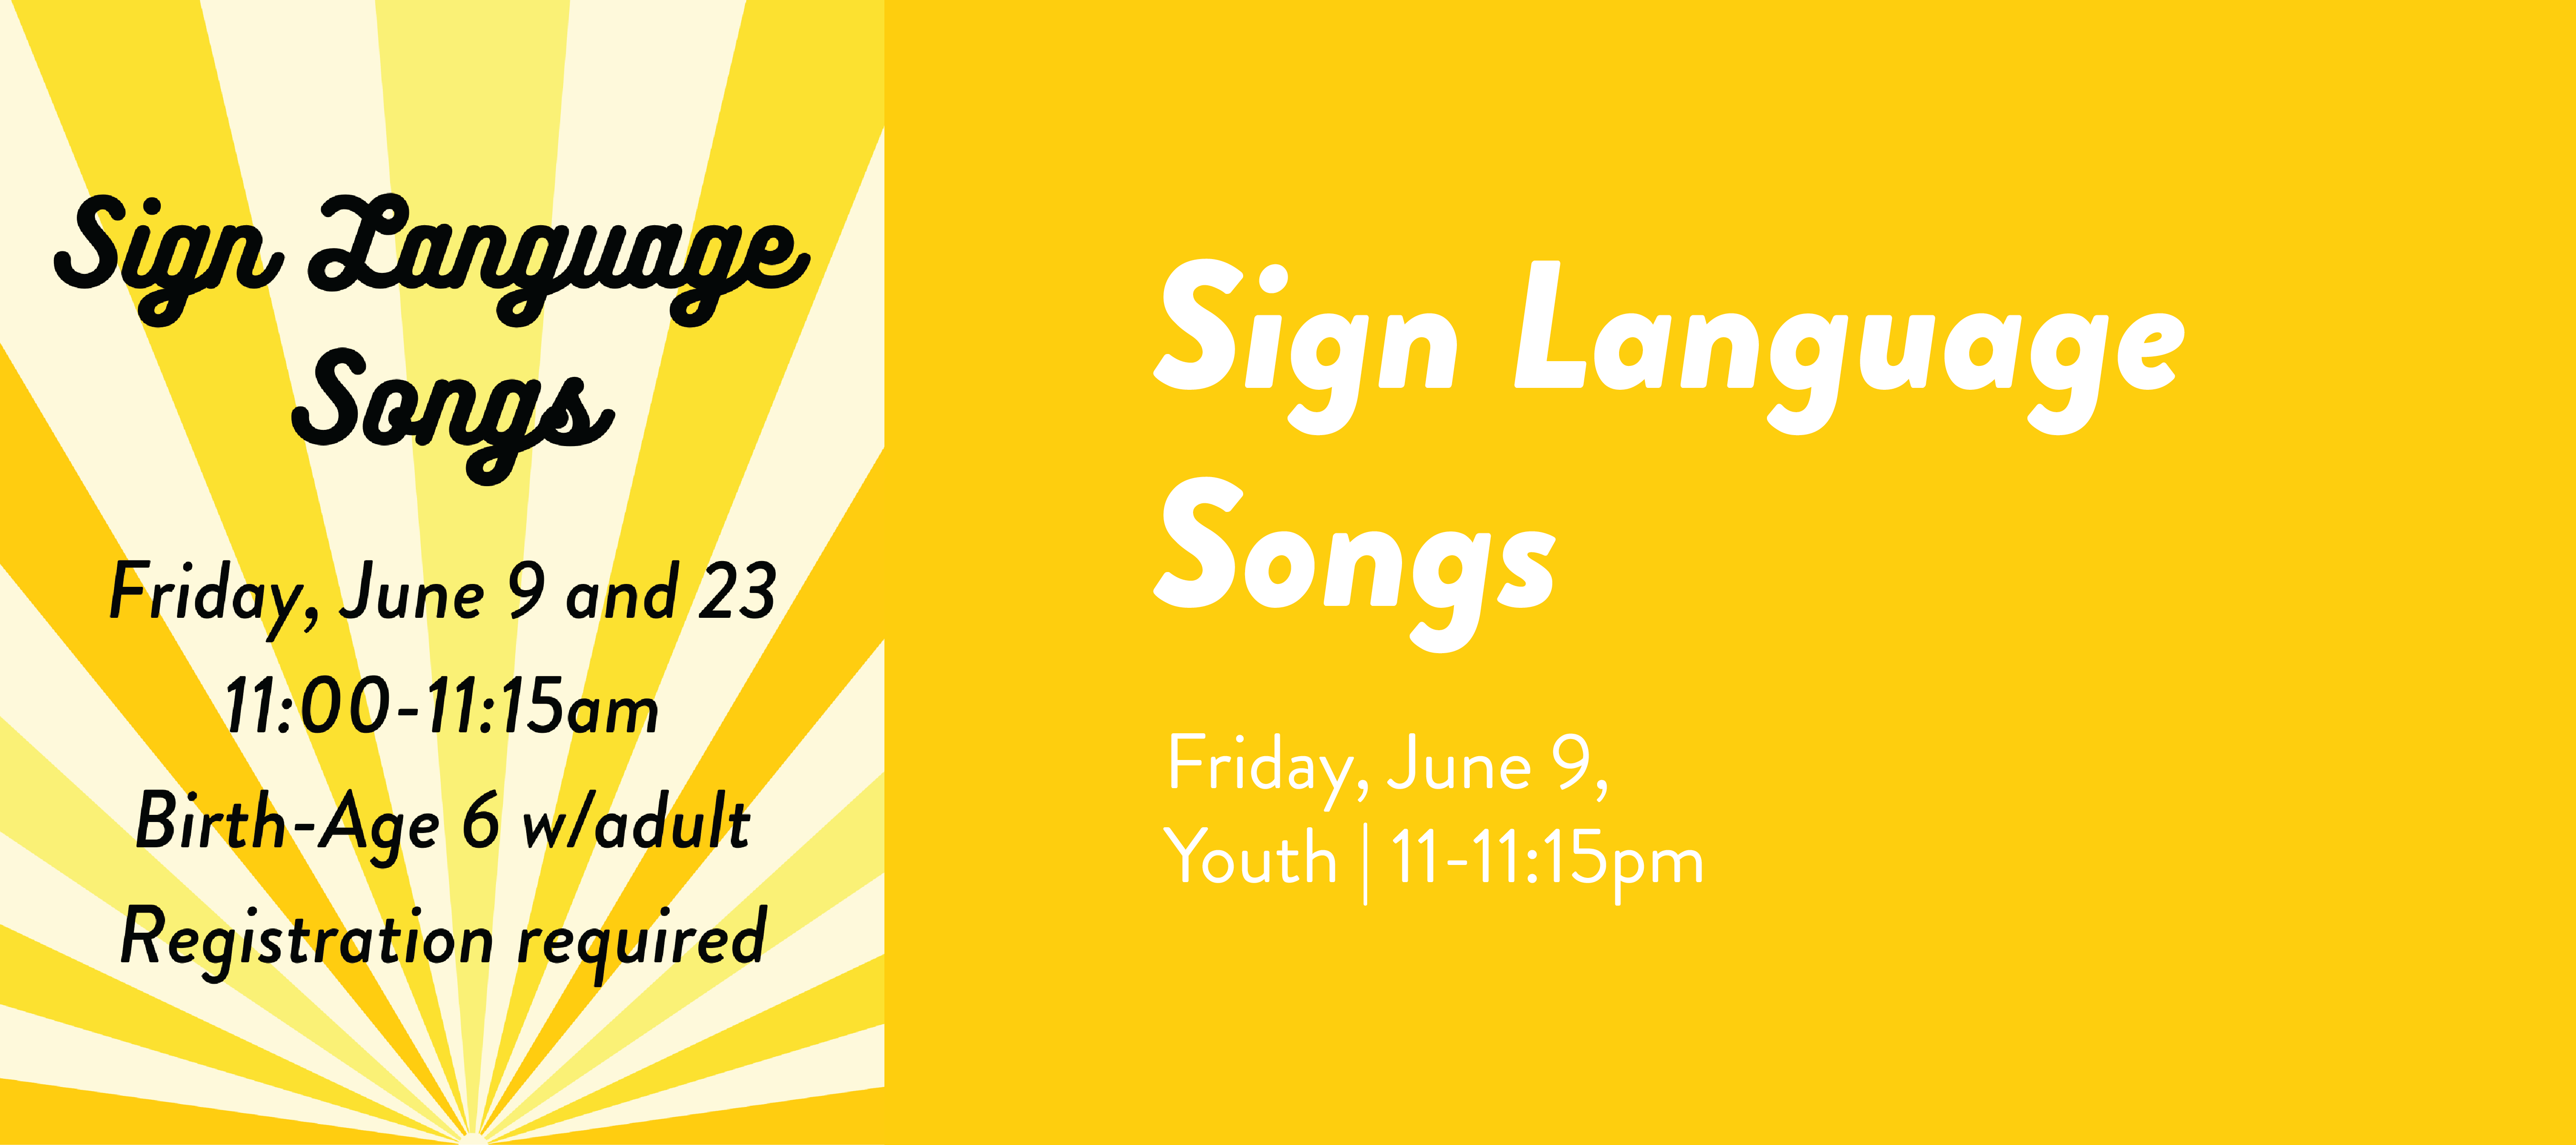 Sign Language Songs, prospect heights public library, prospect heights, public library,